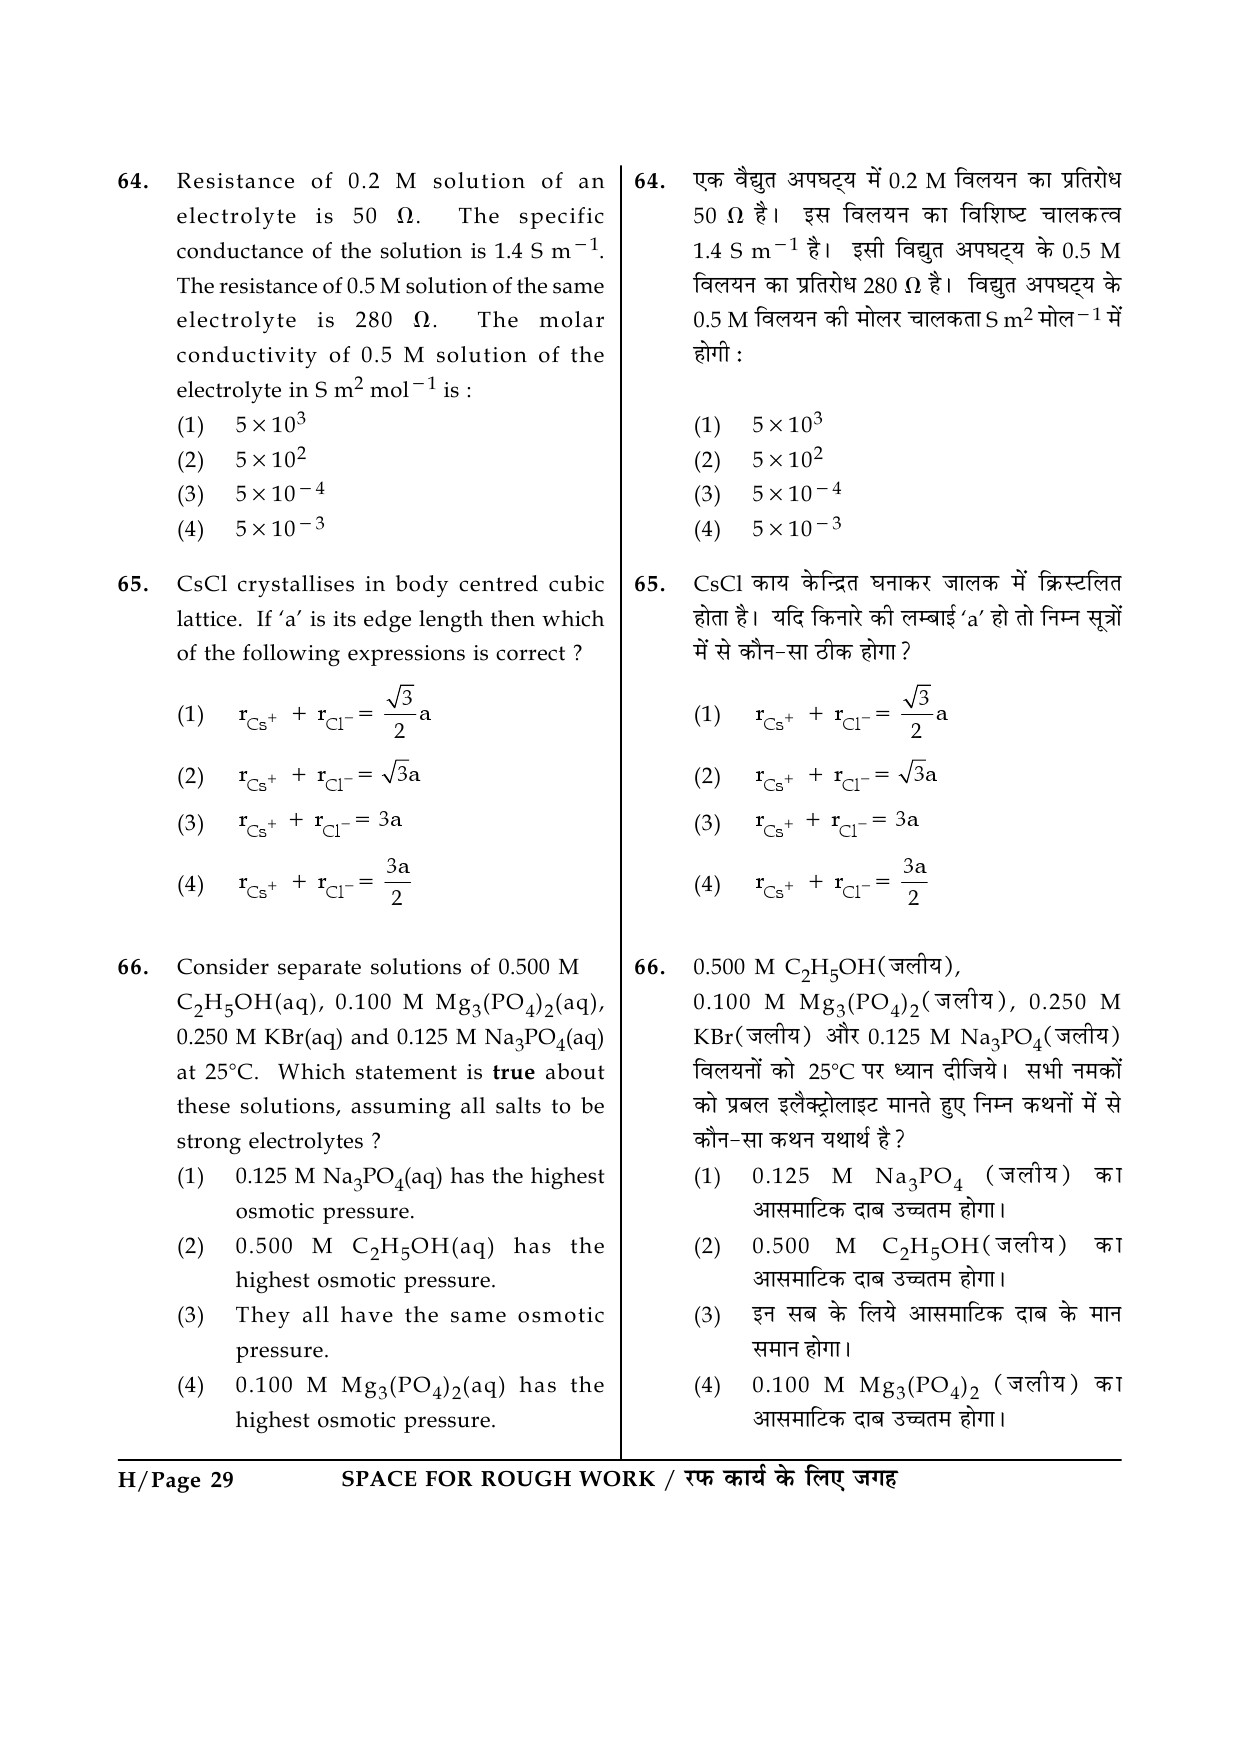 JEE Main Exam Question Paper 2014 Booklet H 29